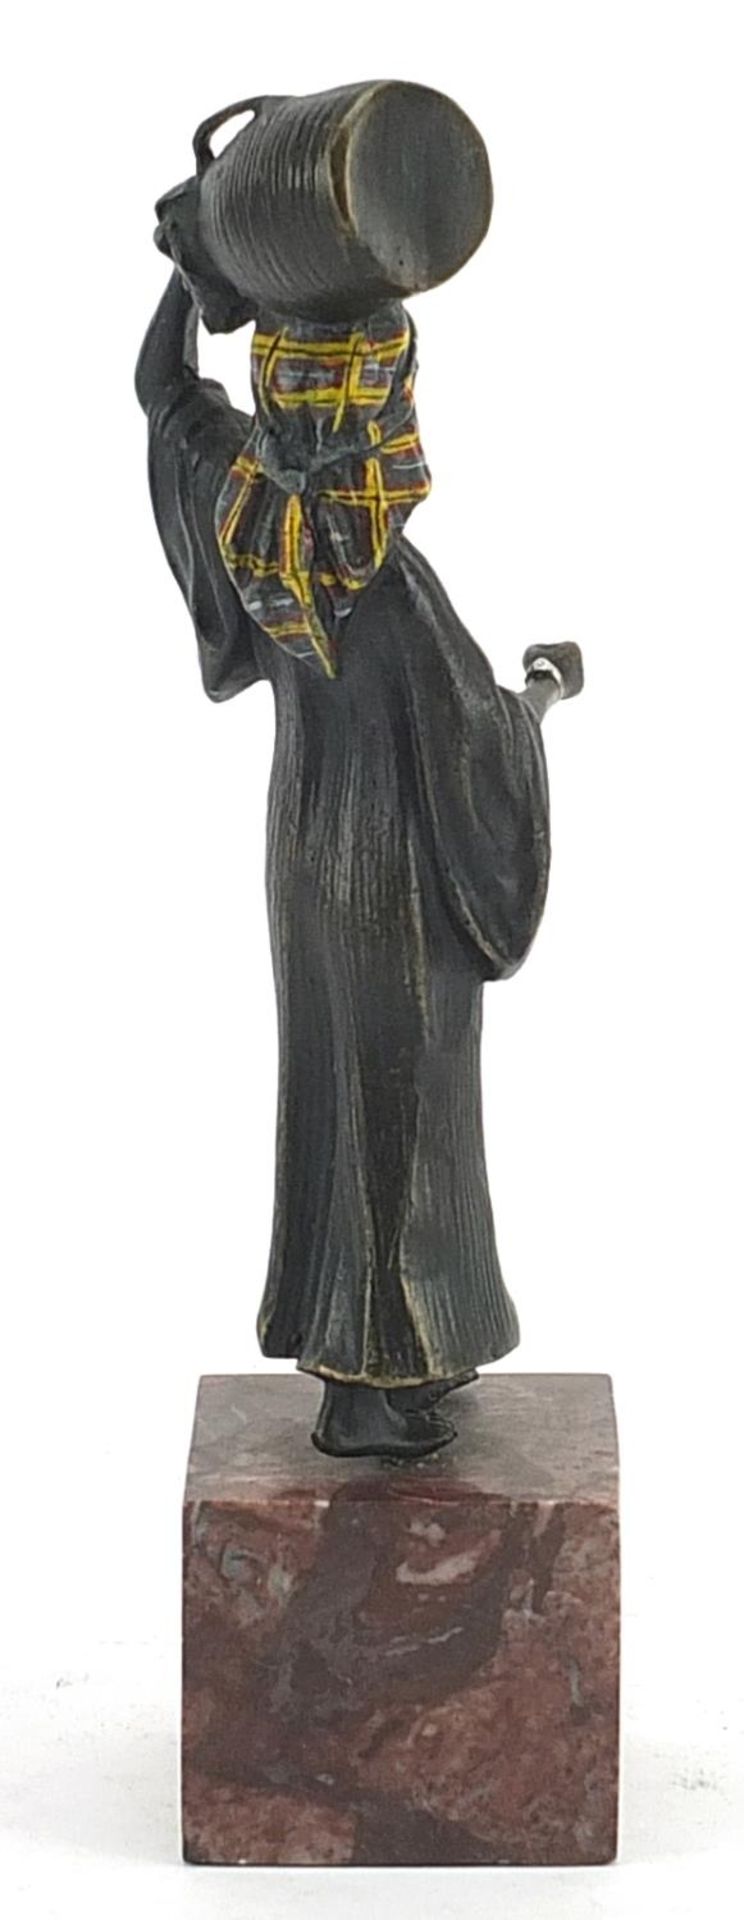 Cold painted bronze figurine of an African water carrier in the style of Franz Xaver Bergmann, - Image 2 of 3